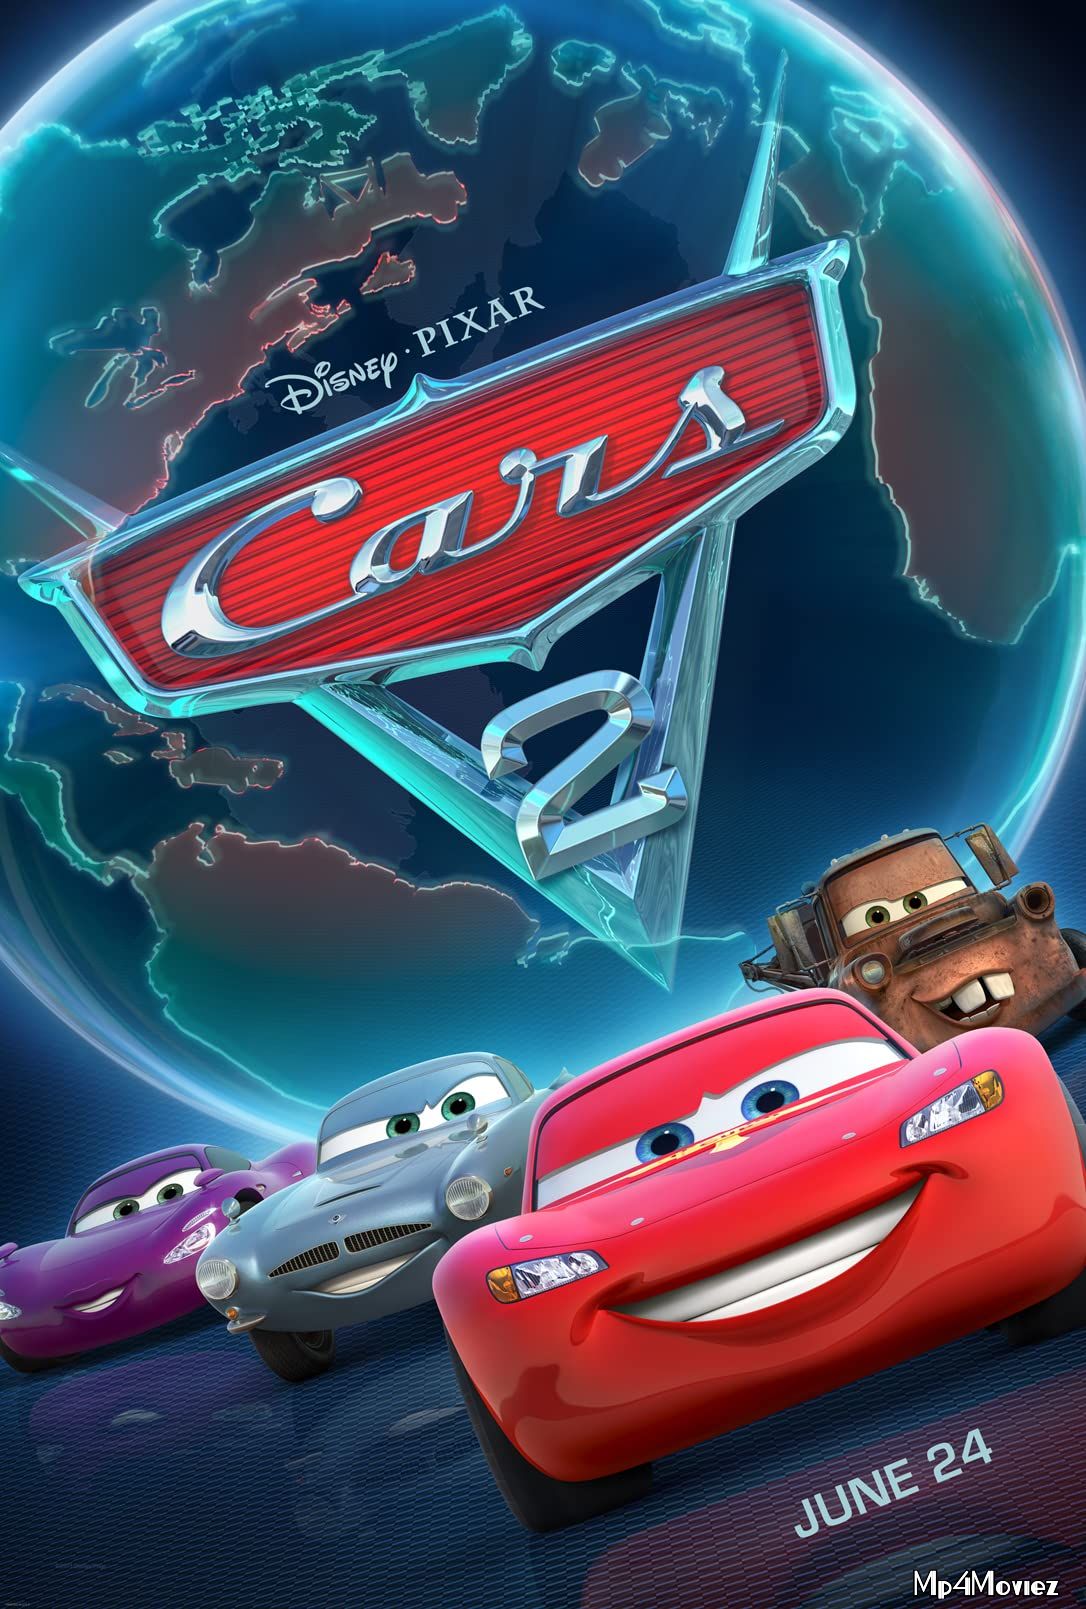 Cars 2 (2011) Hindi Dubbed Full Movie download full movie